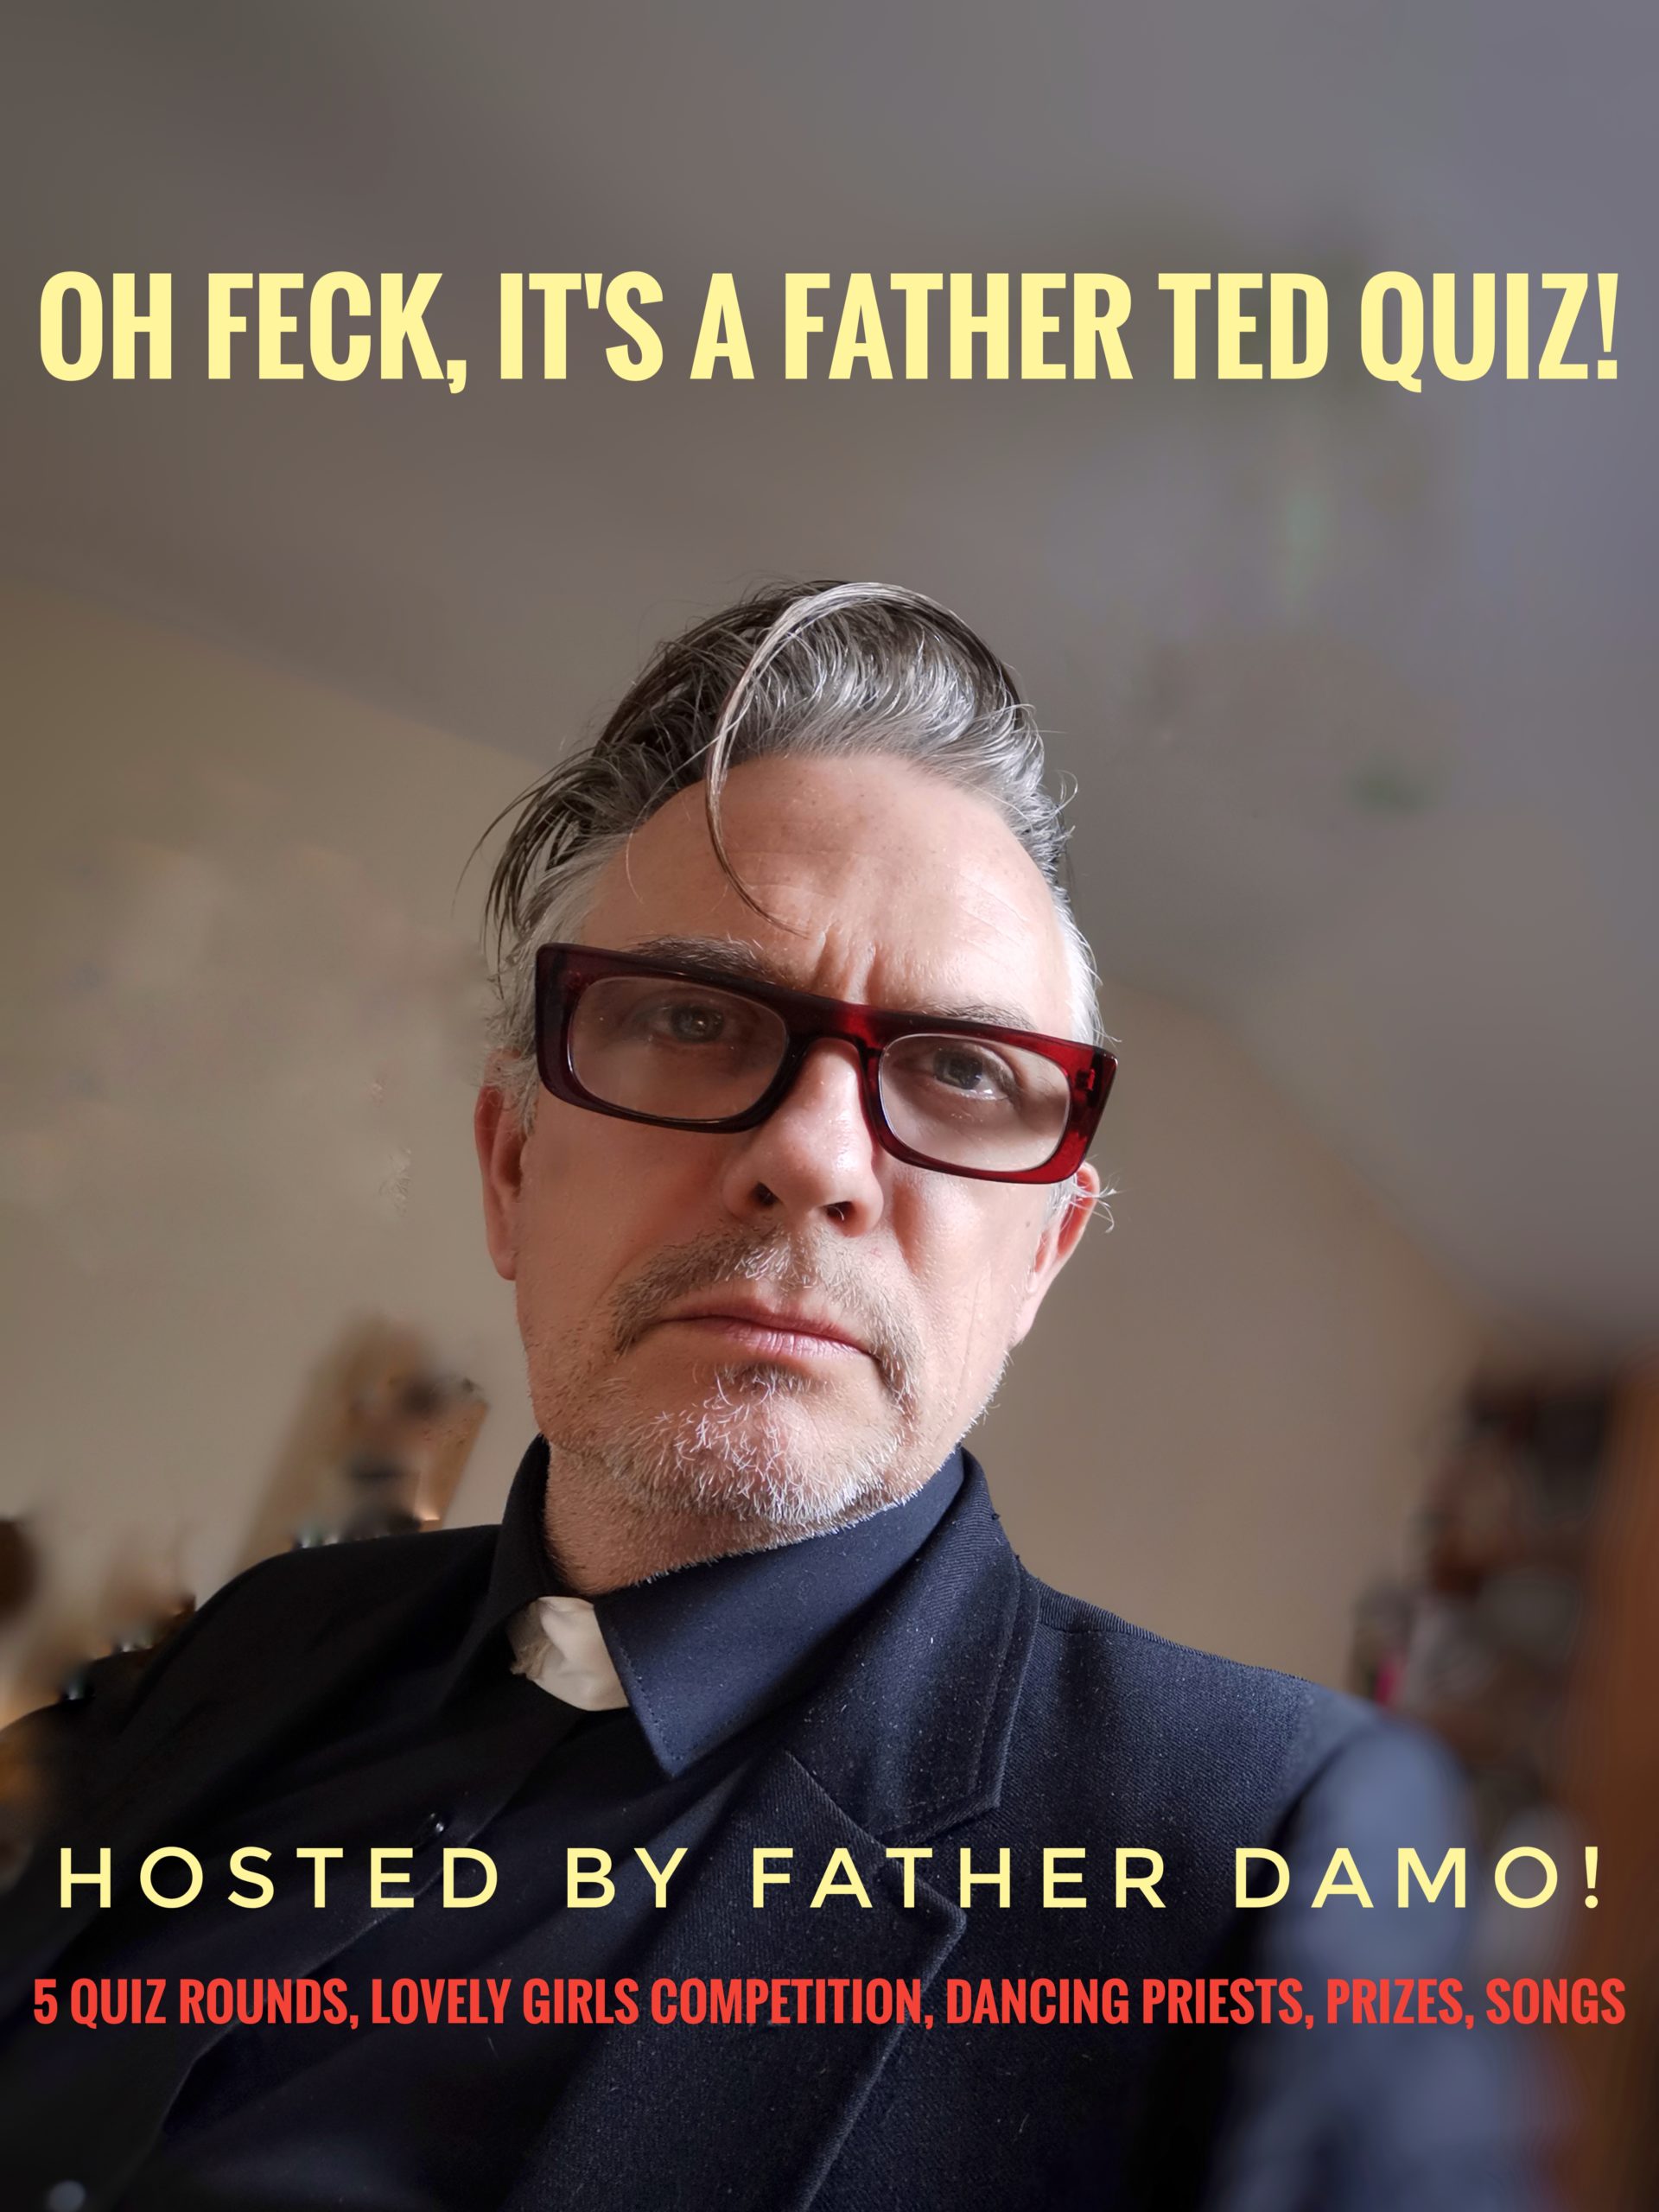 Father Ted Quiz hosted by Father Damo ( Joe Rooney )